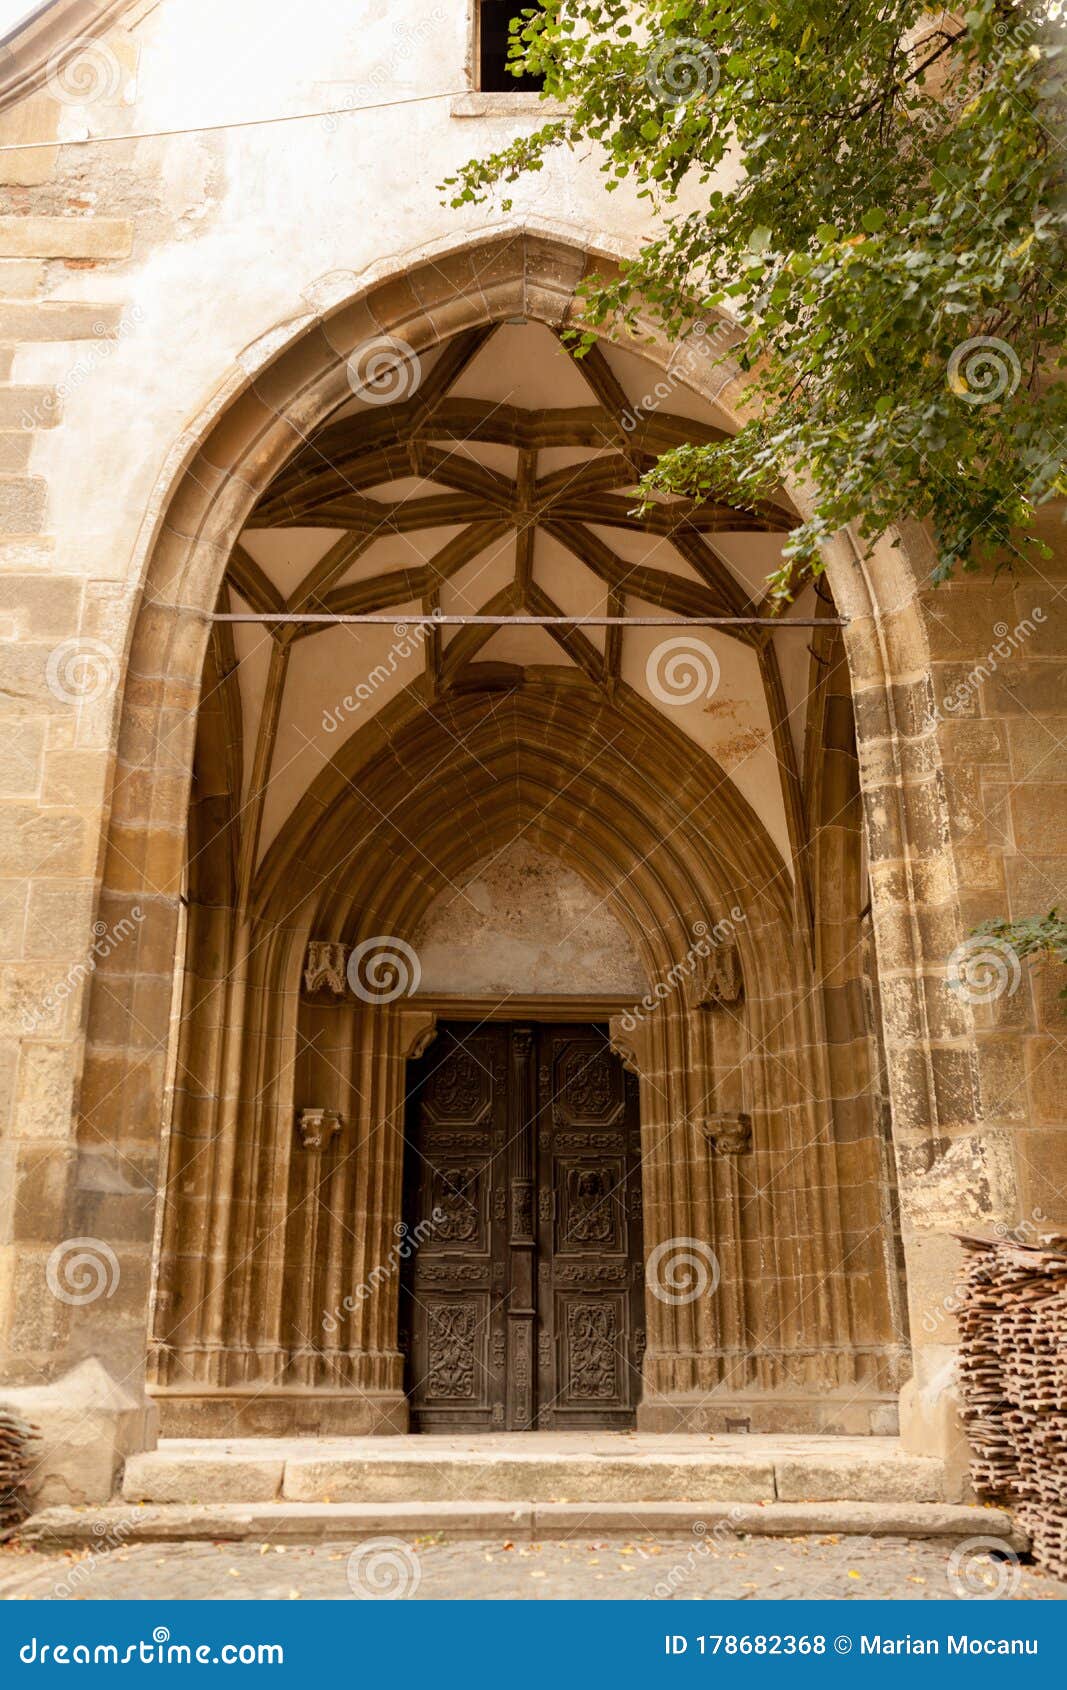 entrance to a gothic chapel at biserica neagra - brasov